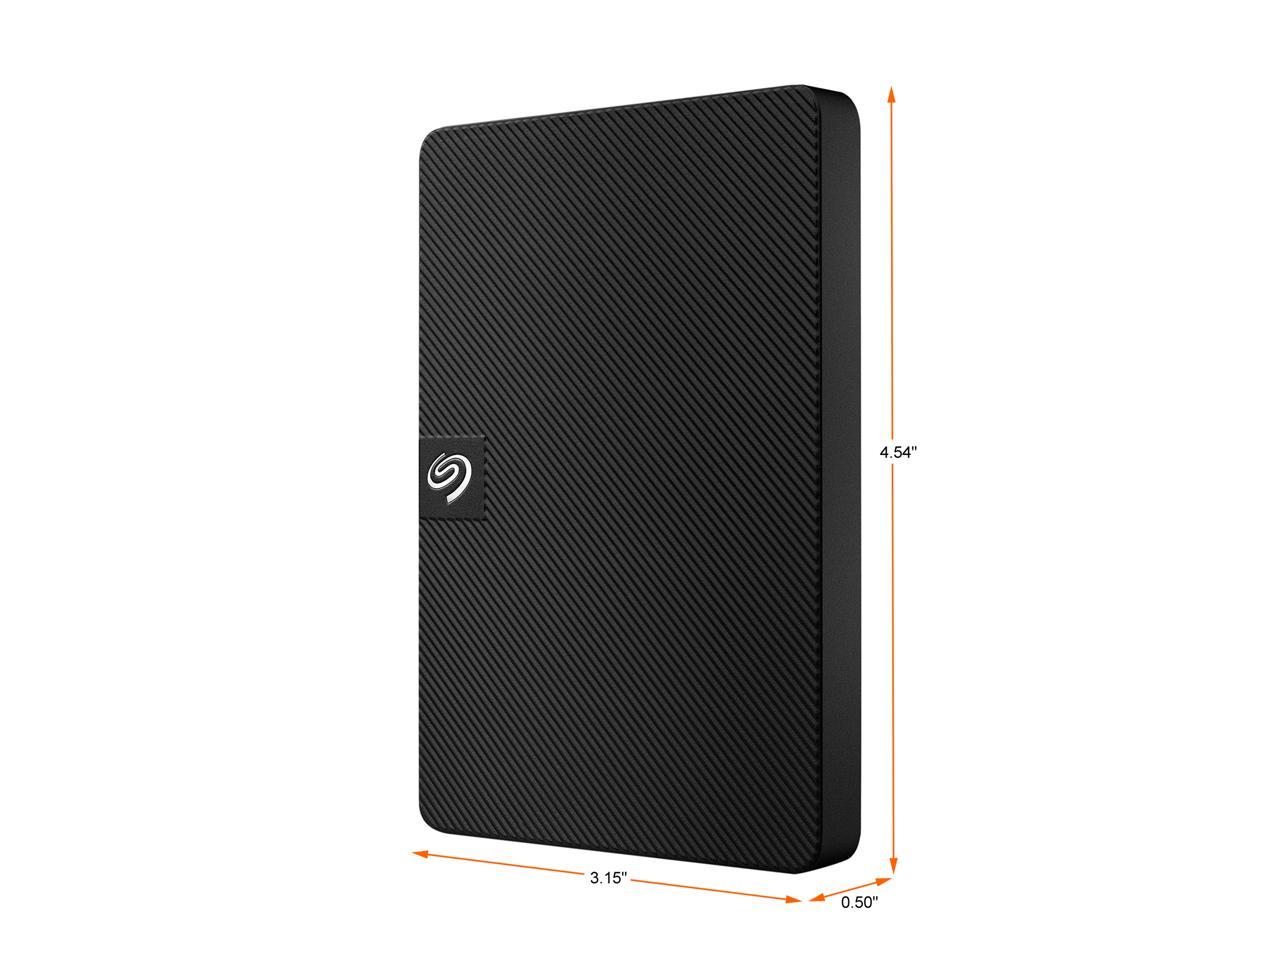 Seagate Expansion Portable 1Tb External Hard Drive Hdd - 2.5 Inch Usb 3.0, For Mac And Pc With Rescue Services (Stkm1000400)